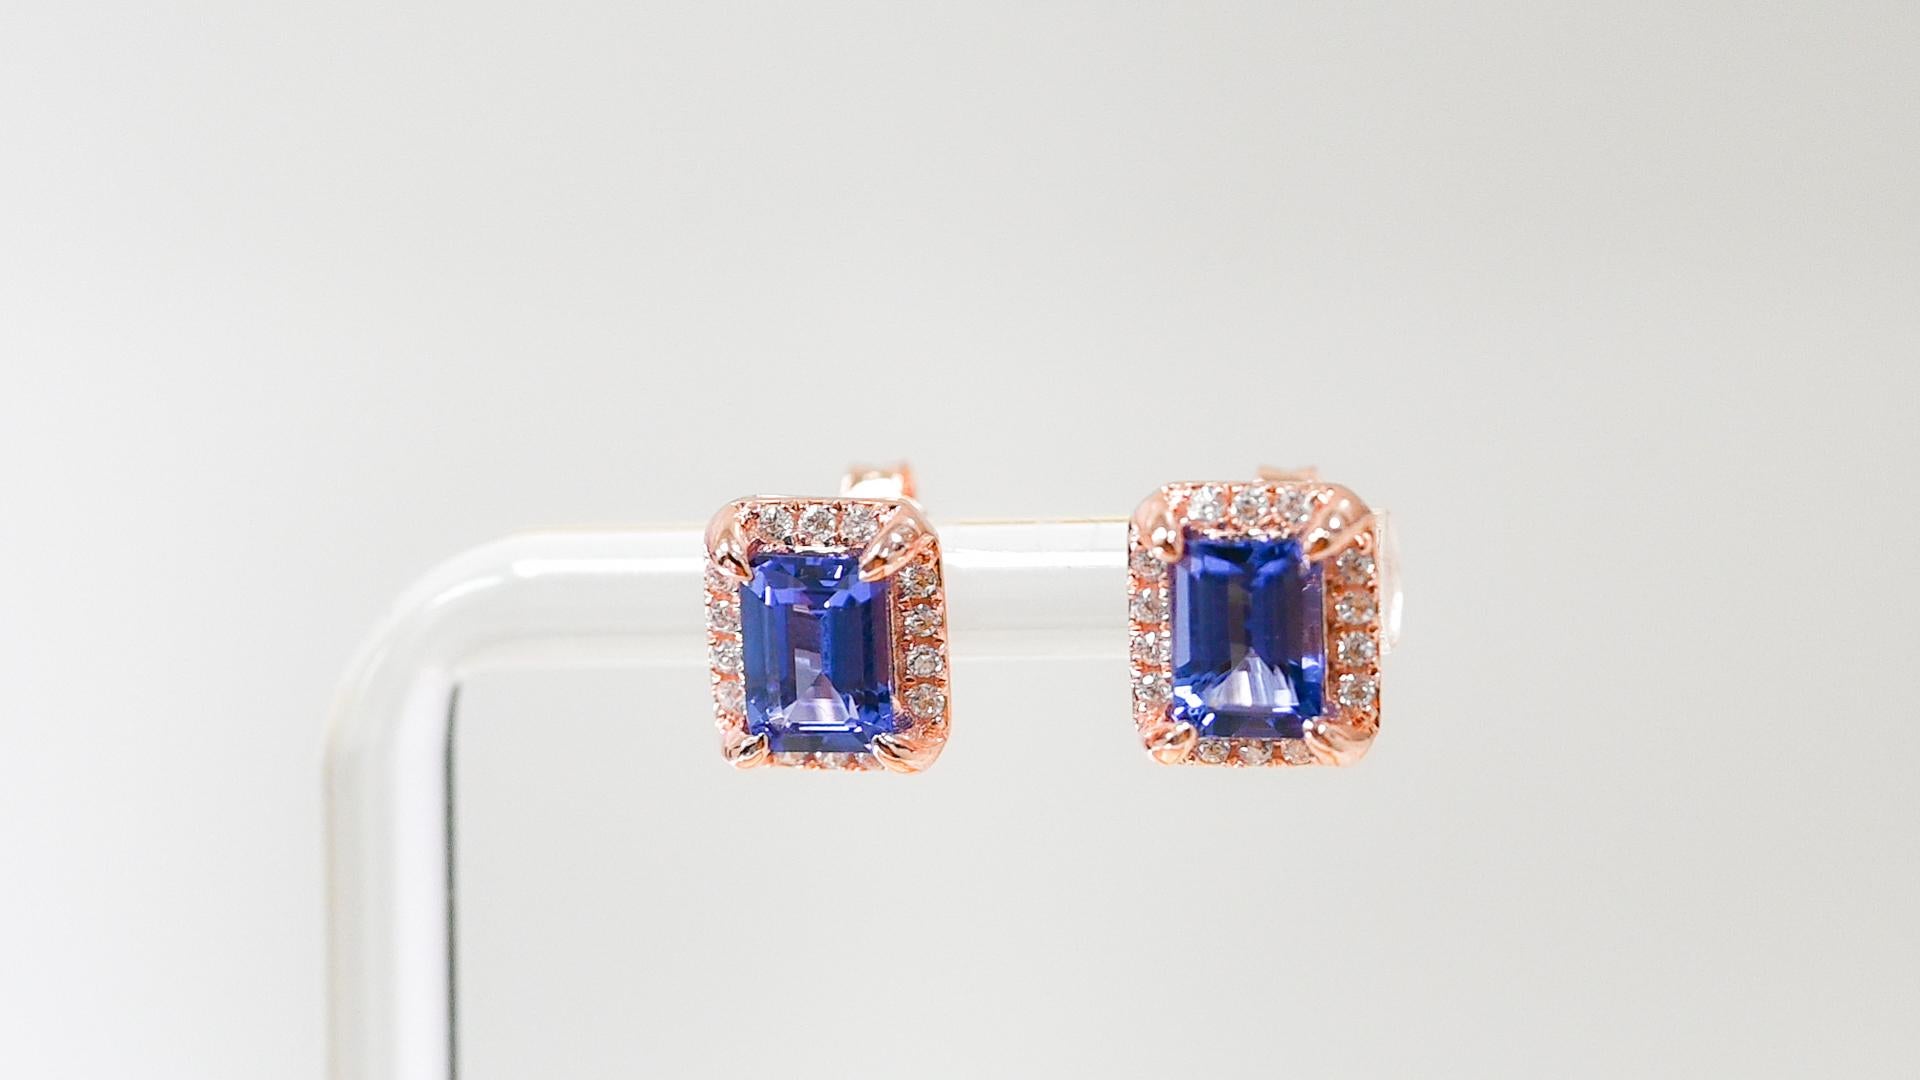 Tanzanite 925 18k 1MM  Rose Metal Platted women's Earrings 2.30cts
Primary Stone: Tanzanite
Stone shape: 7 x 5mm Emerald cut
Stone weight: 2.30 cts
Metal Weight : 1.79g

Secondary Stone : White CZ
Number of Stones : 28 pieces



